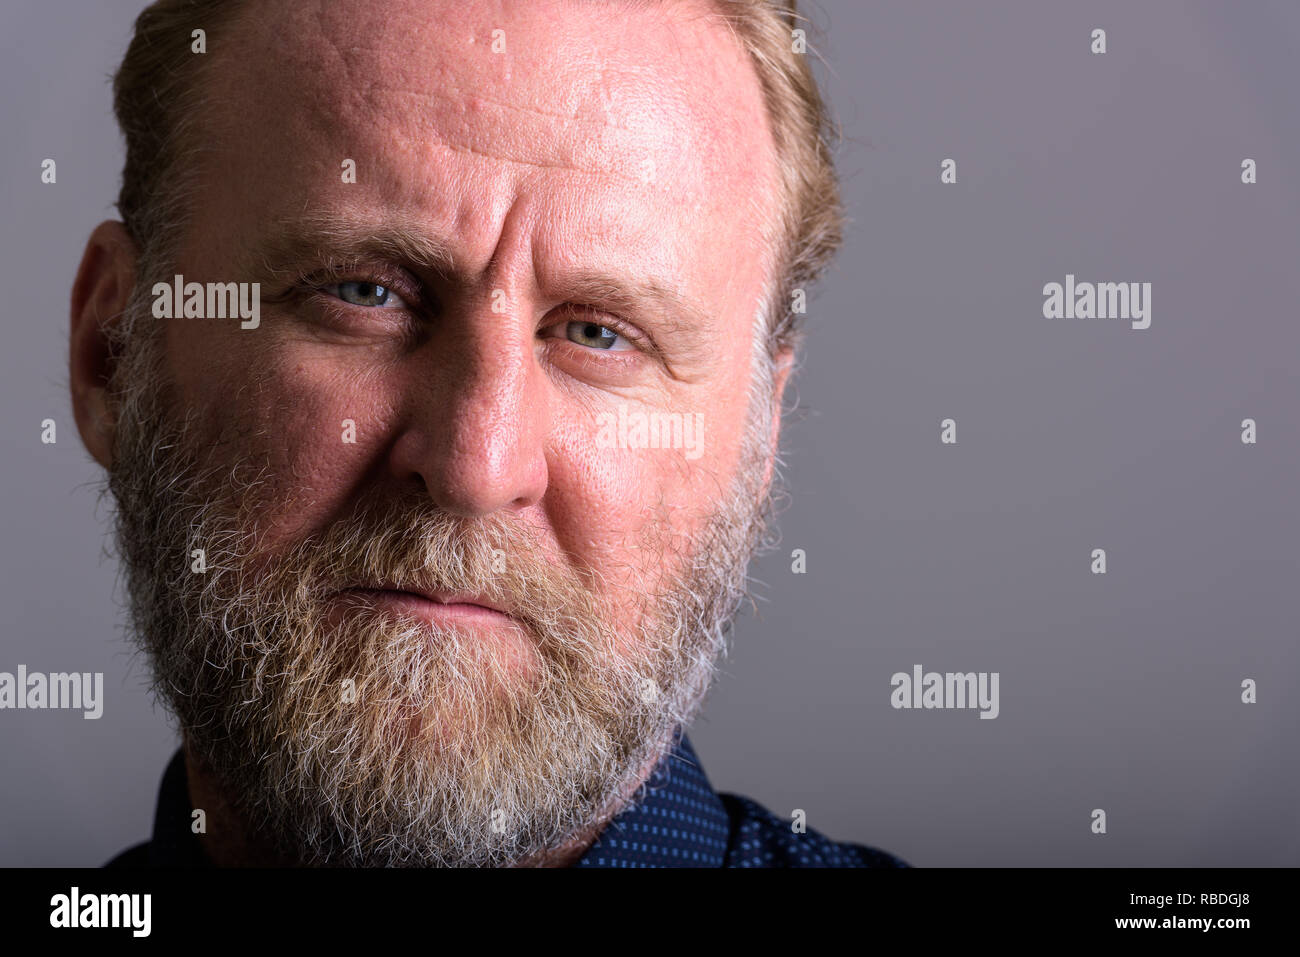 Close up portrait of mature bearded man looking at camera Banque D'Images